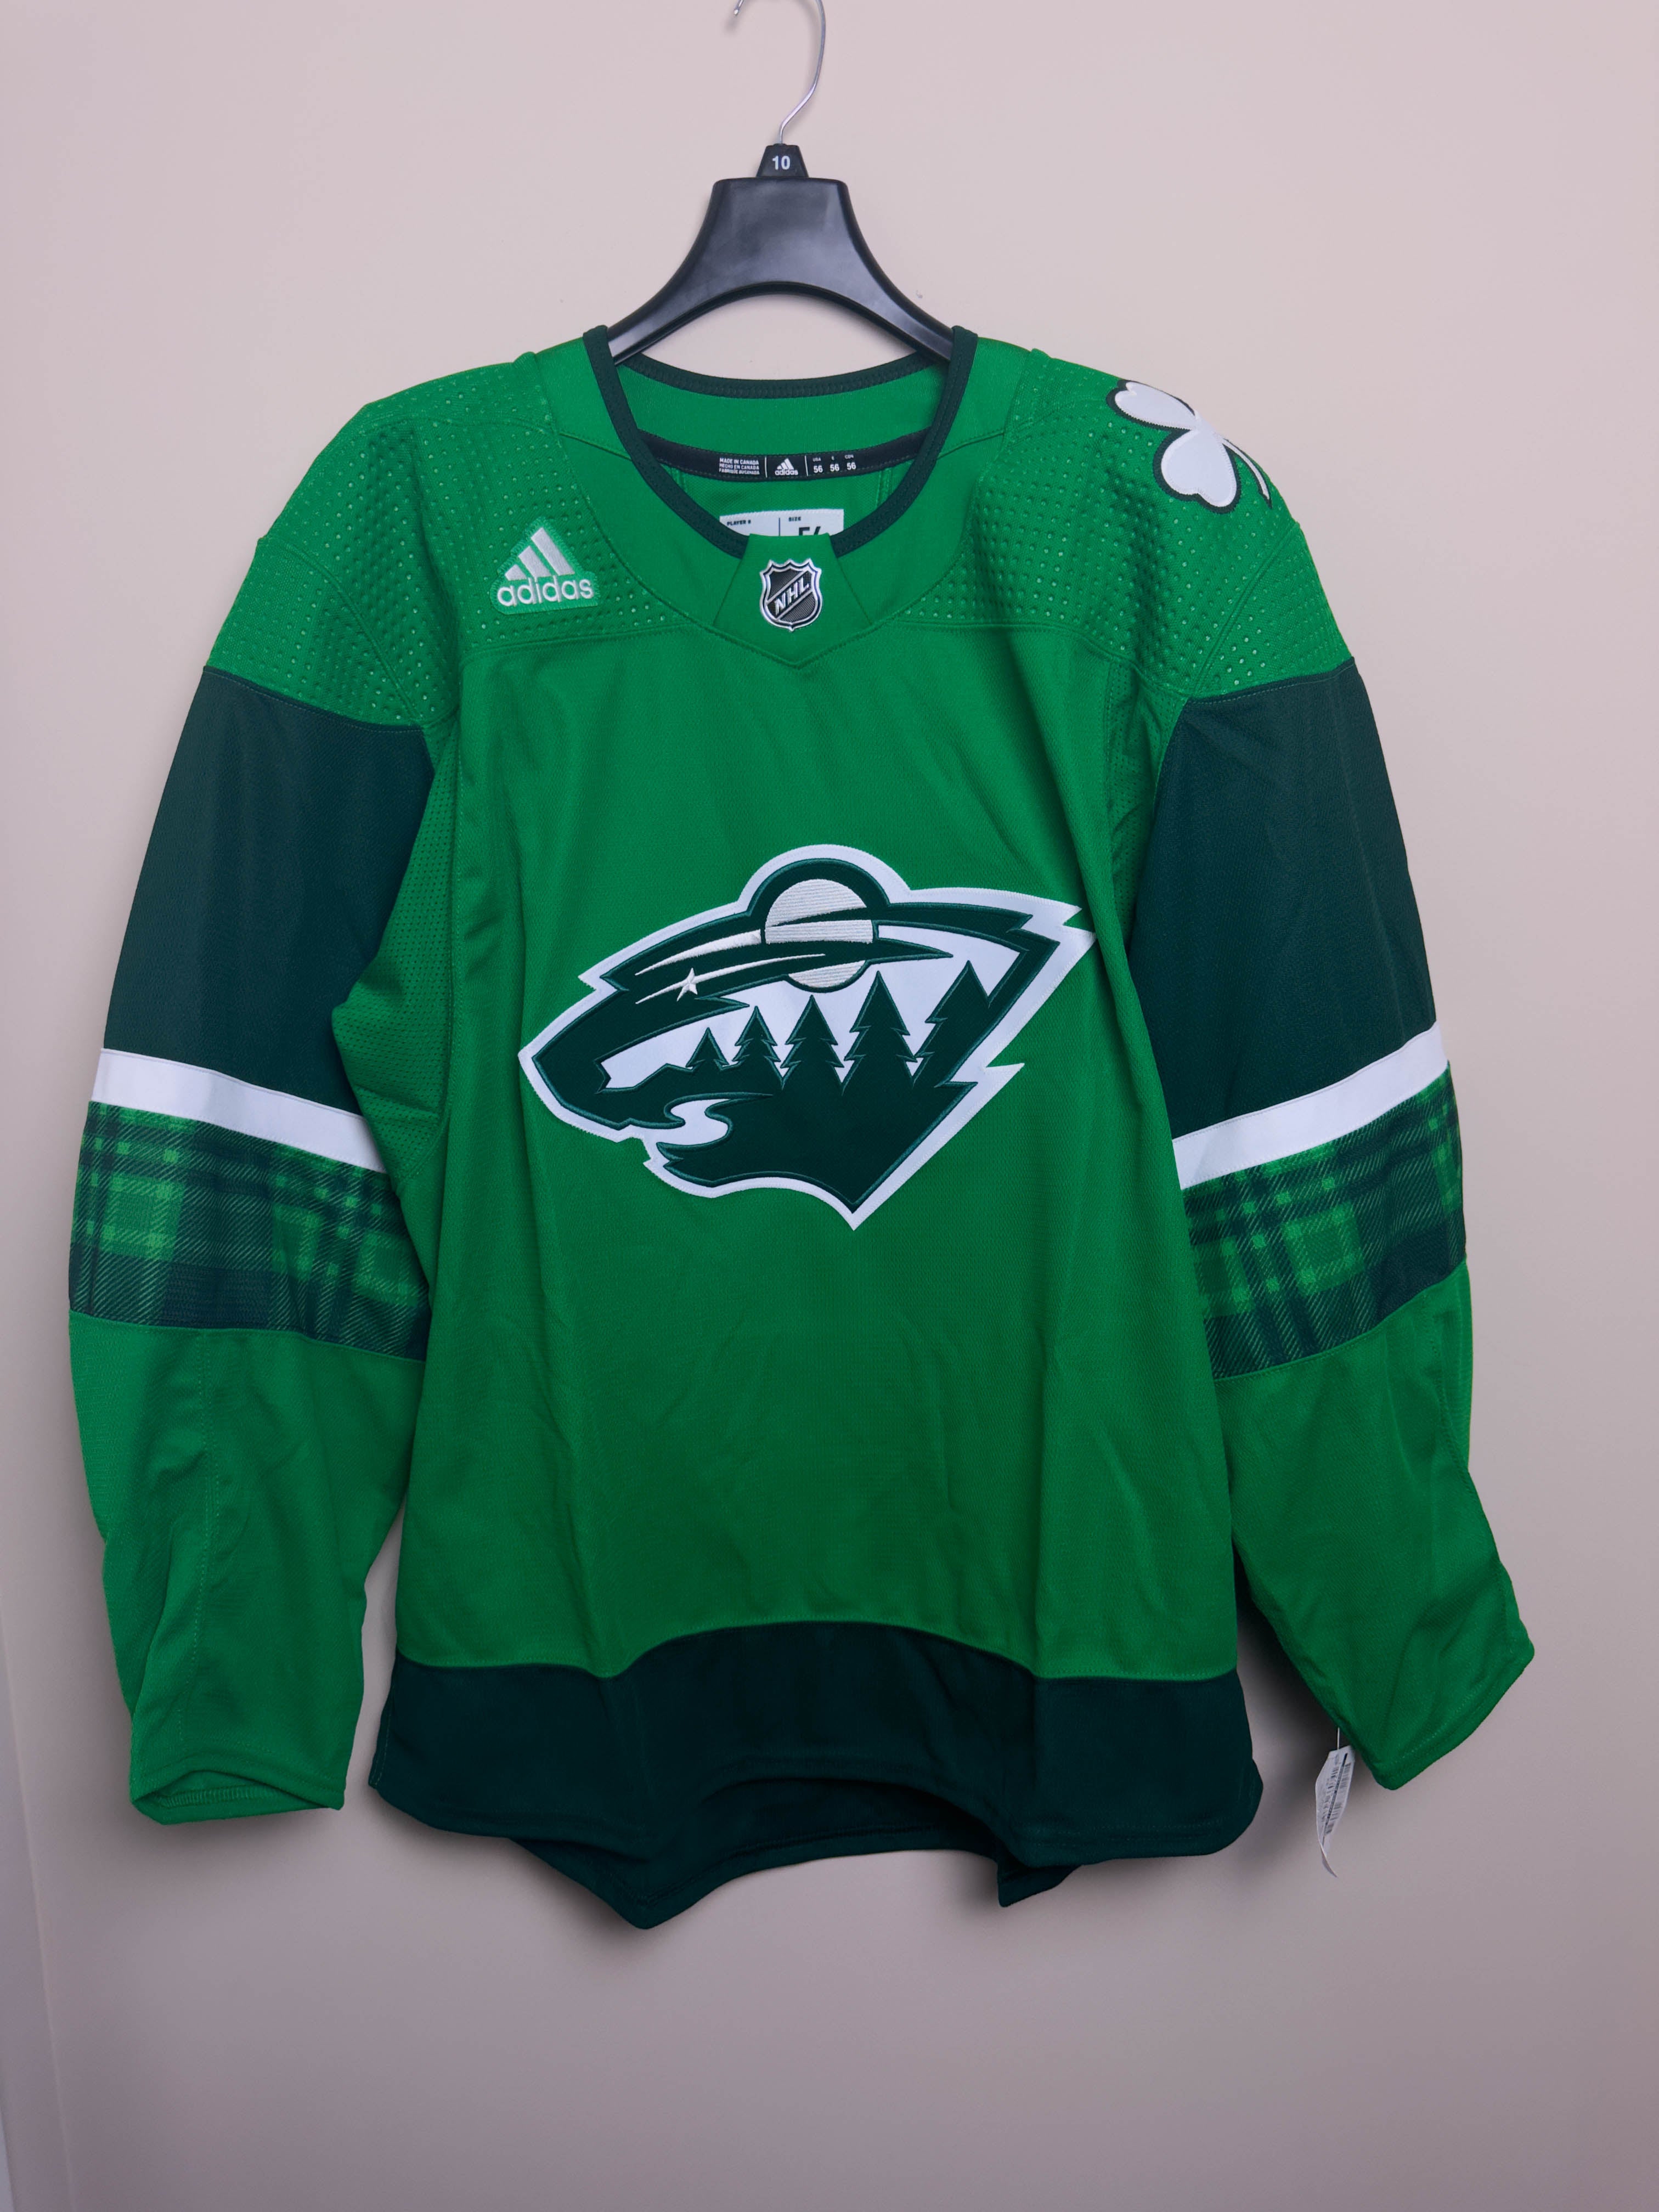 These St. Patrick's Day jerseys are - Vegas Golden Knights